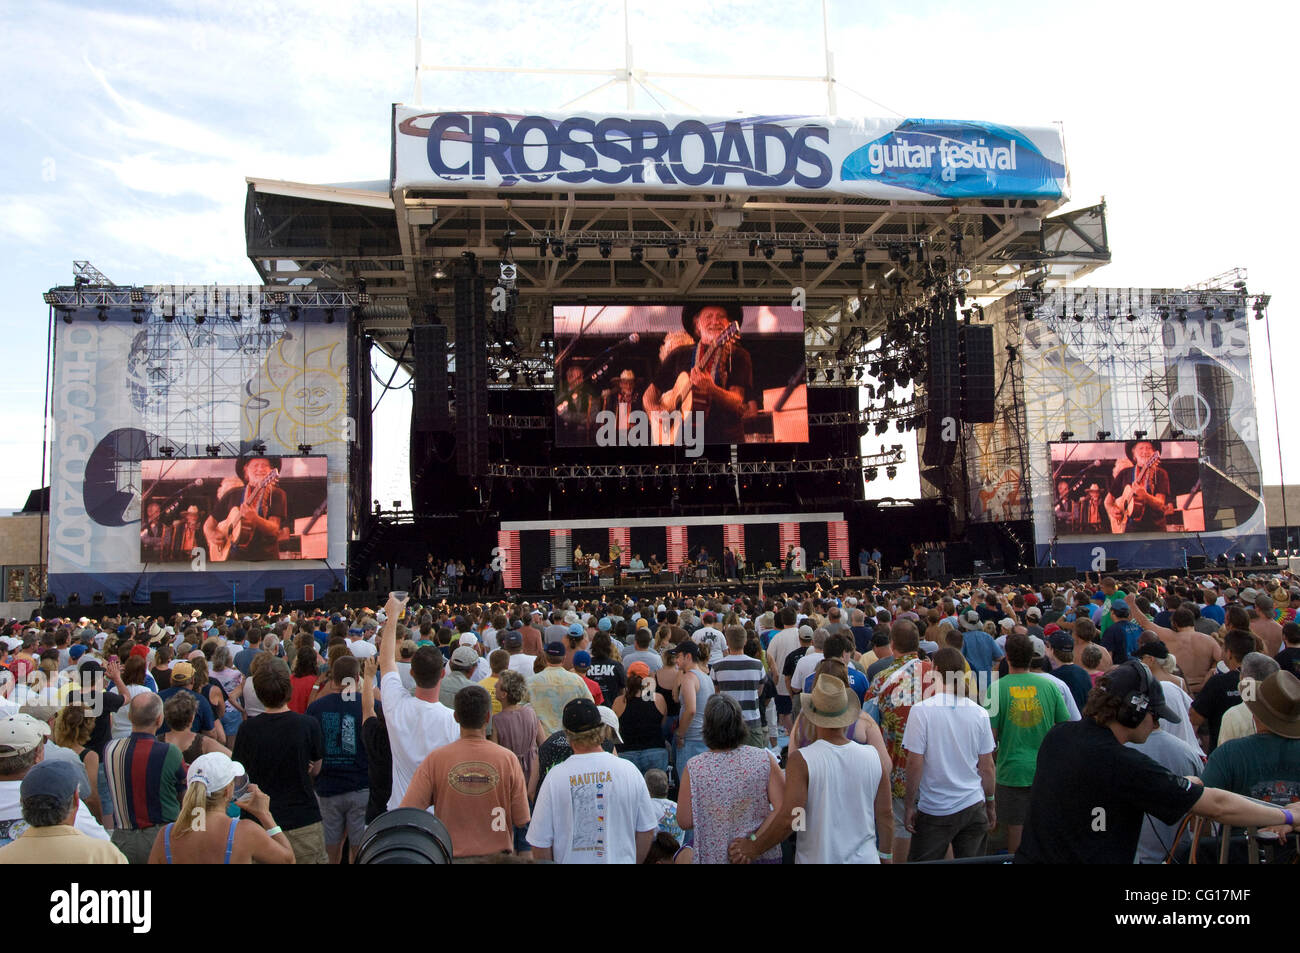 Jul 28, 2007 - Bridgeview, IL, USA - Over 29,000 people witnessed the sold-out 11-hour Crossroads Guitar Festival at Toyota Park in Bridgeview, Illinois, featuring the world's greatest guitarists playing sidemen to each other on one stage supporting the Crossroads Centre Antigua, a chemical dependen Stock Photo